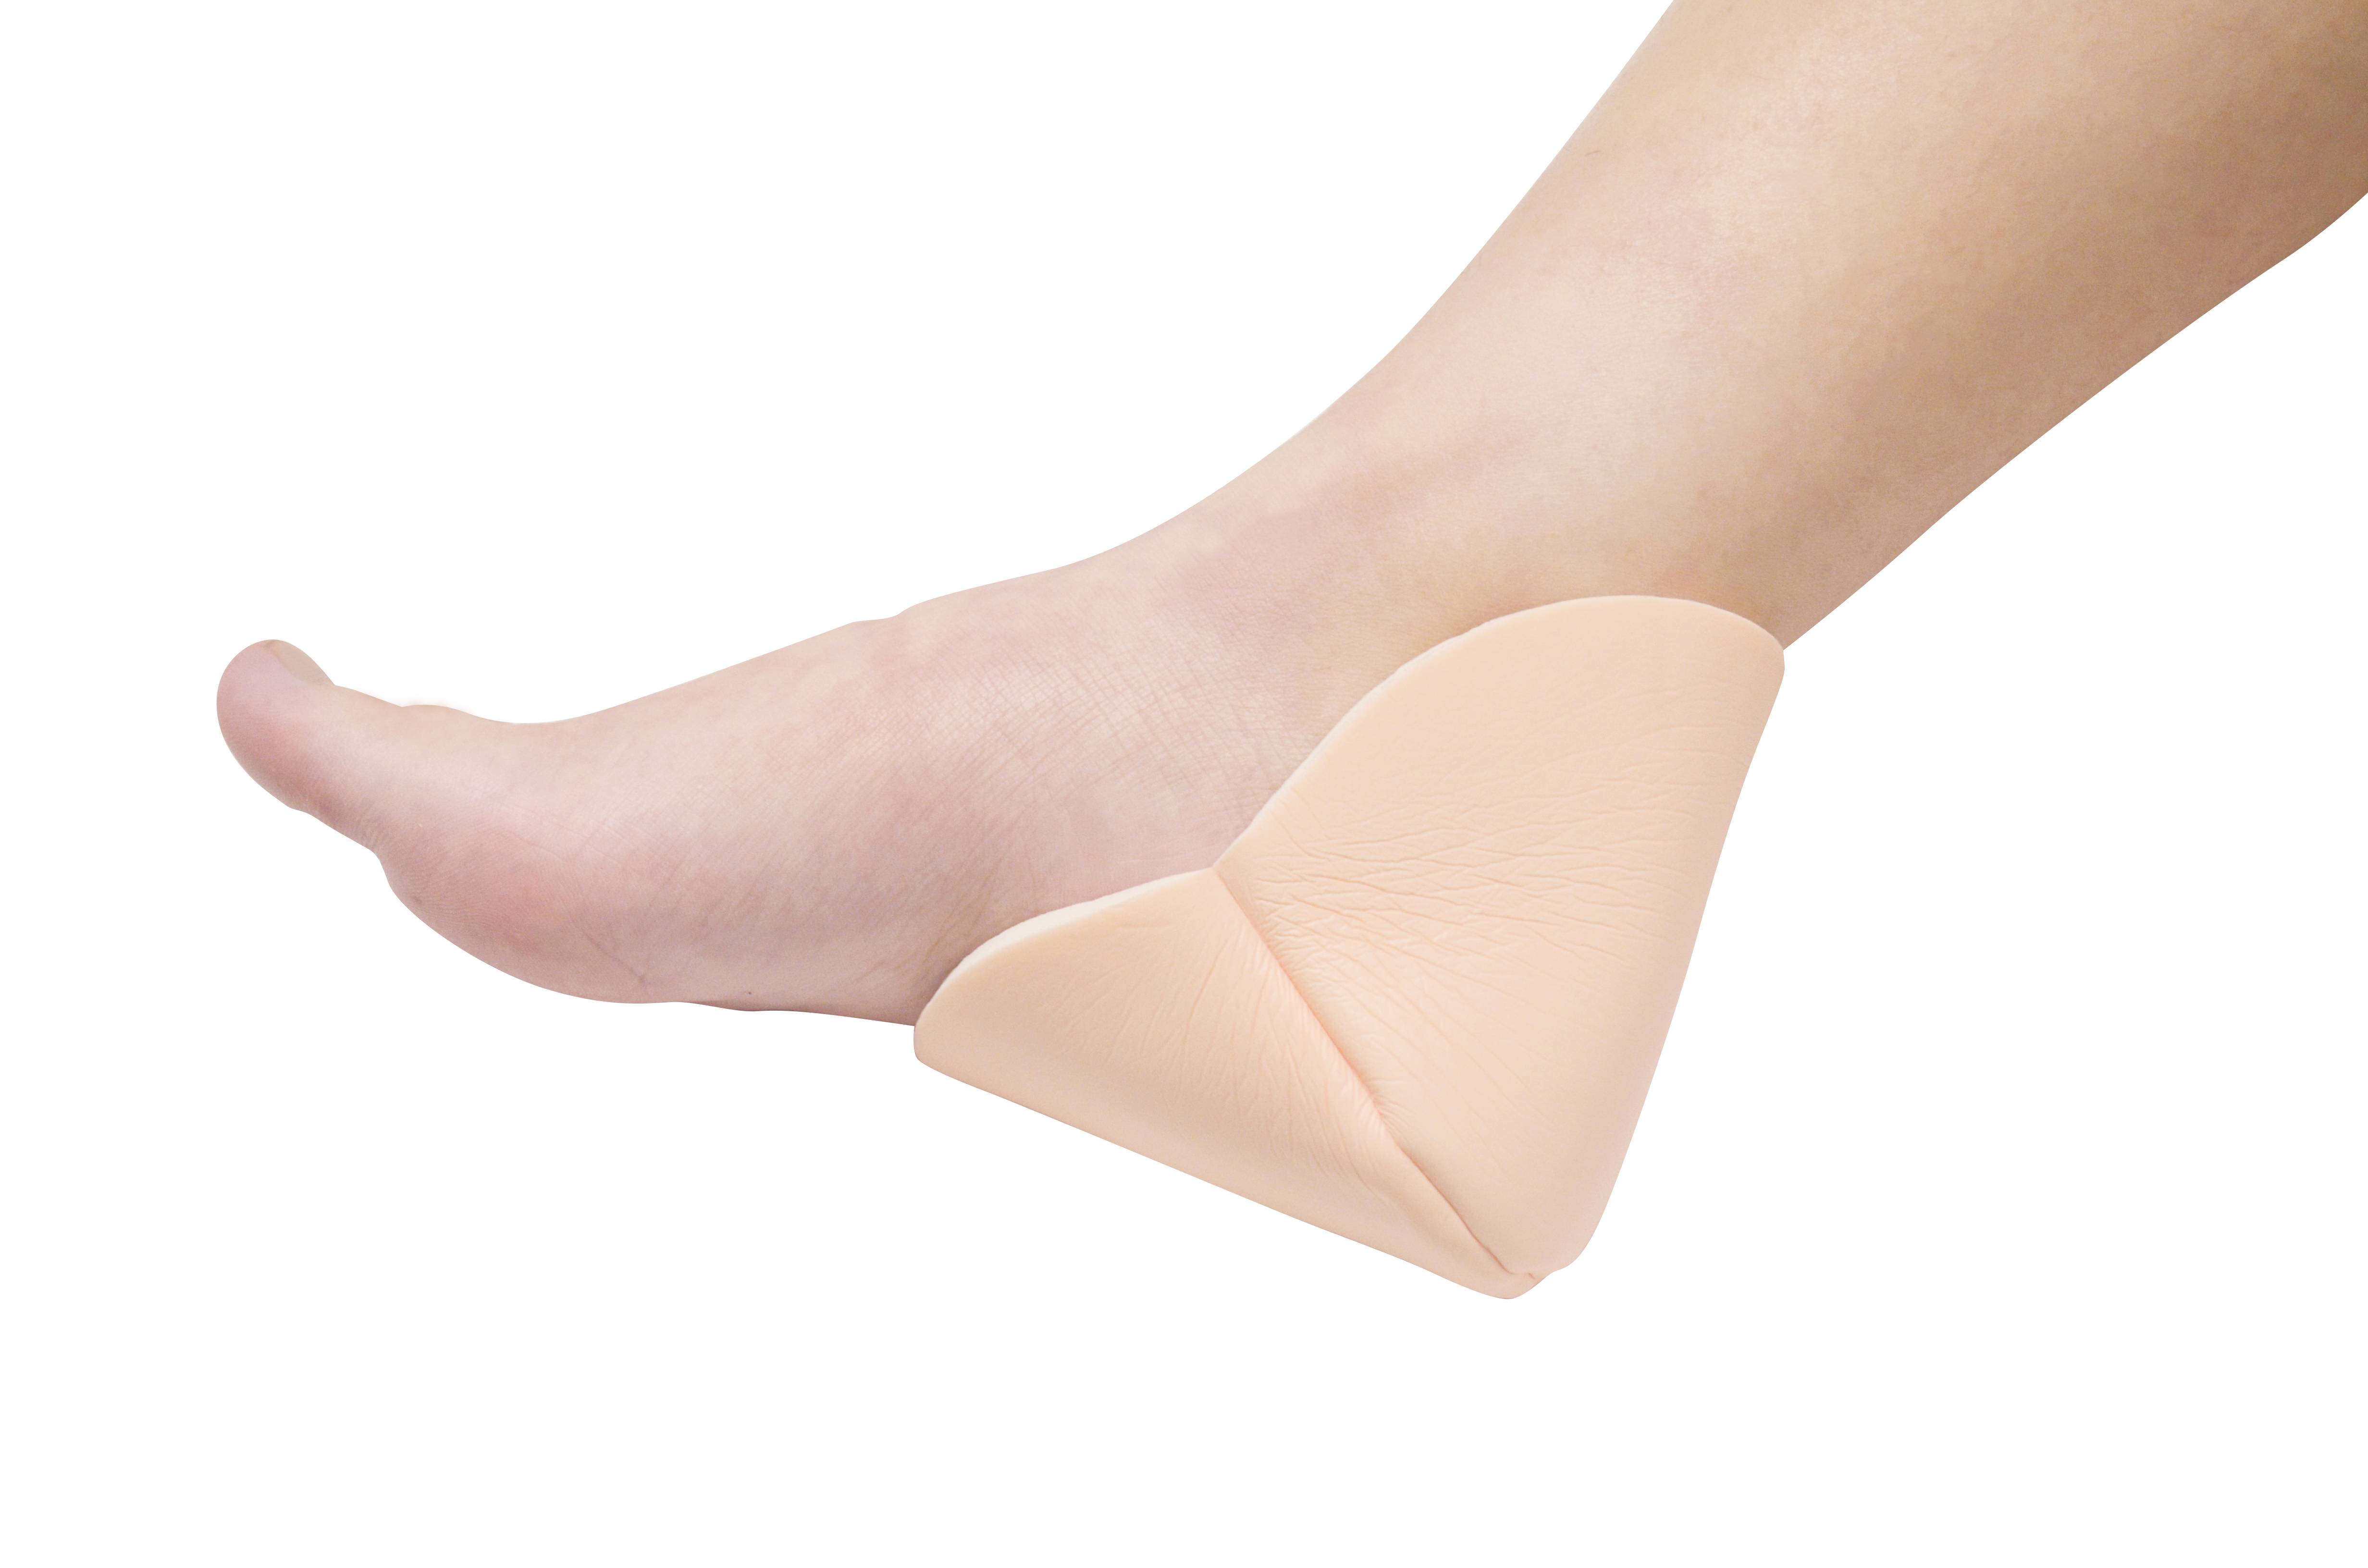 Different Grades of Diabetic Foot Wounds and Related Advanced Wound Dressings